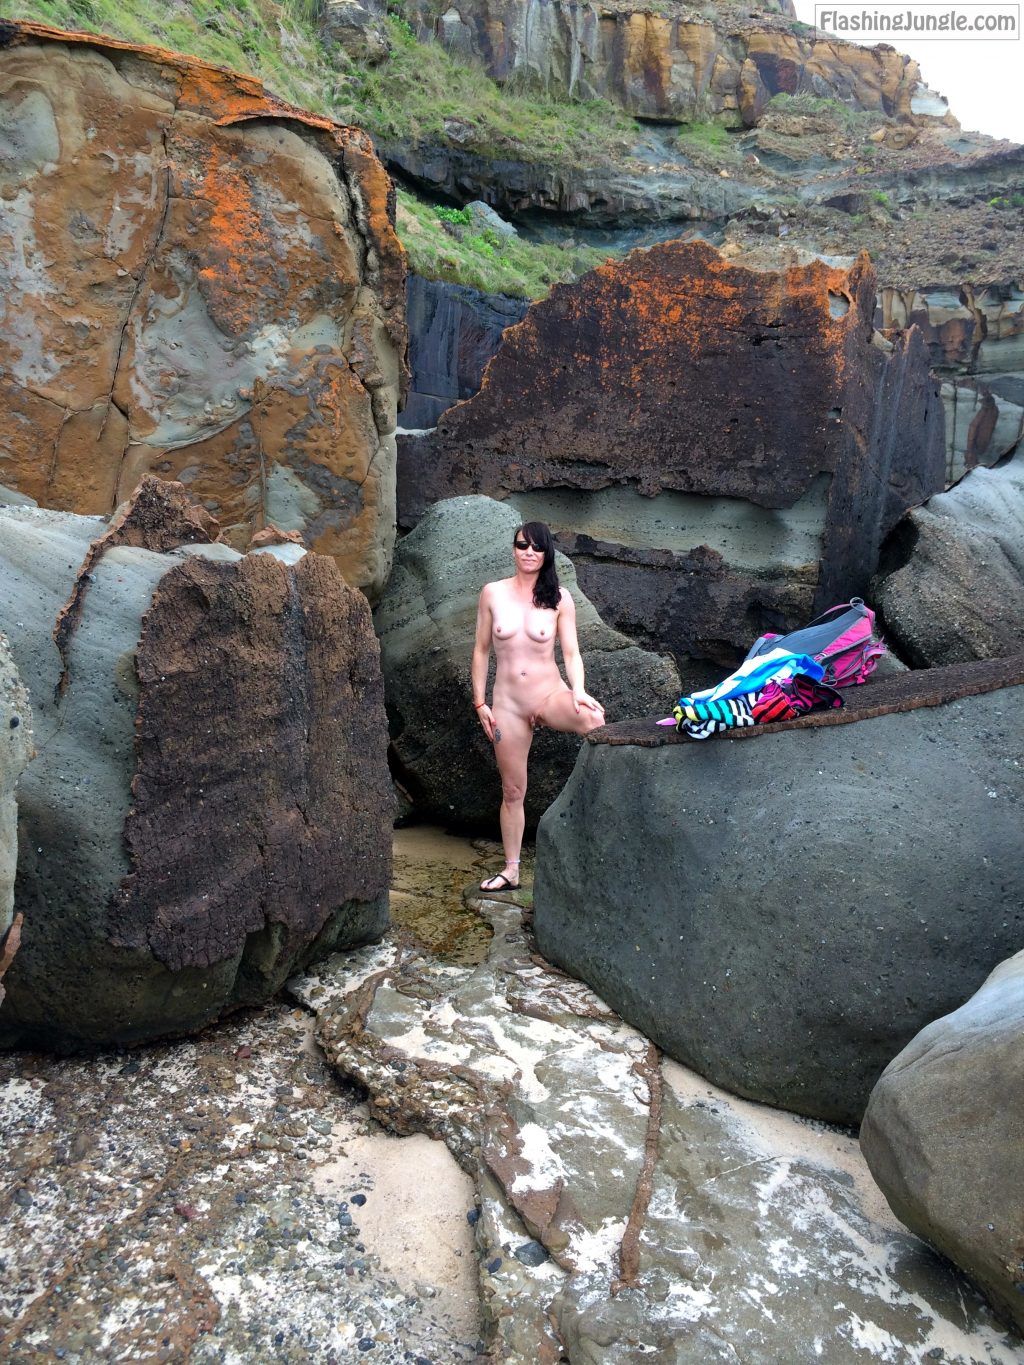 wife strip - Dark haired milf nude beach and sunglasses hot sexy wife stripped down and showing of her sexy shaved pussy and cute little tits for voyeurs on nude beach - Hotwife Pics